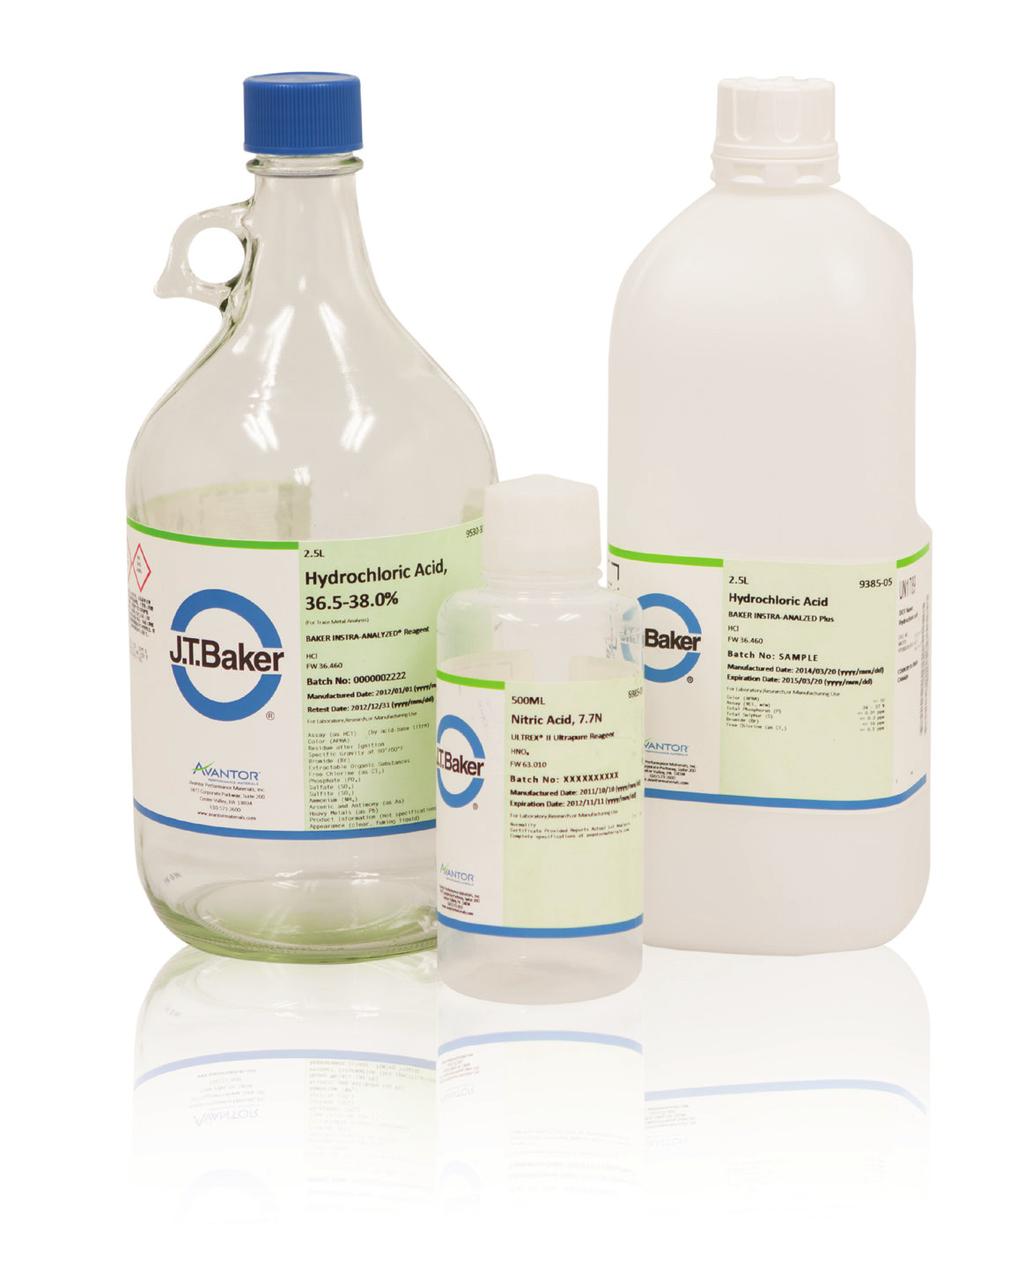 J.T.Baker Brand High-Purity Acids & Reagents Purity and consistency are essential for all reagent chemicals, particularly acids.